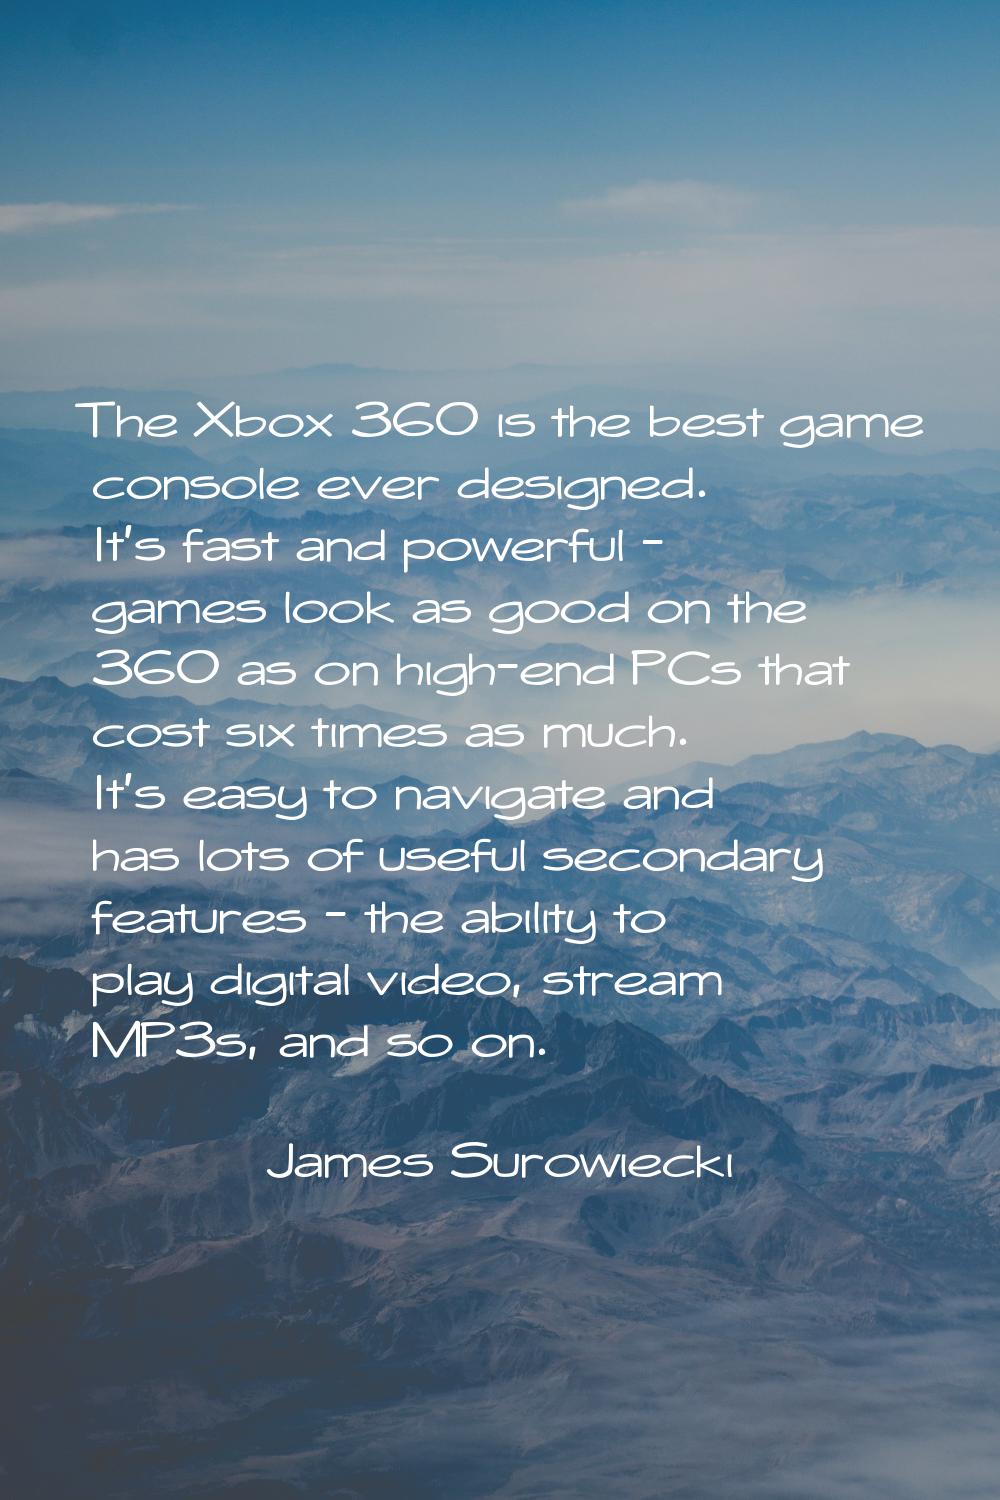 The Xbox 360 is the best game console ever designed. It's fast and powerful - games look as good on